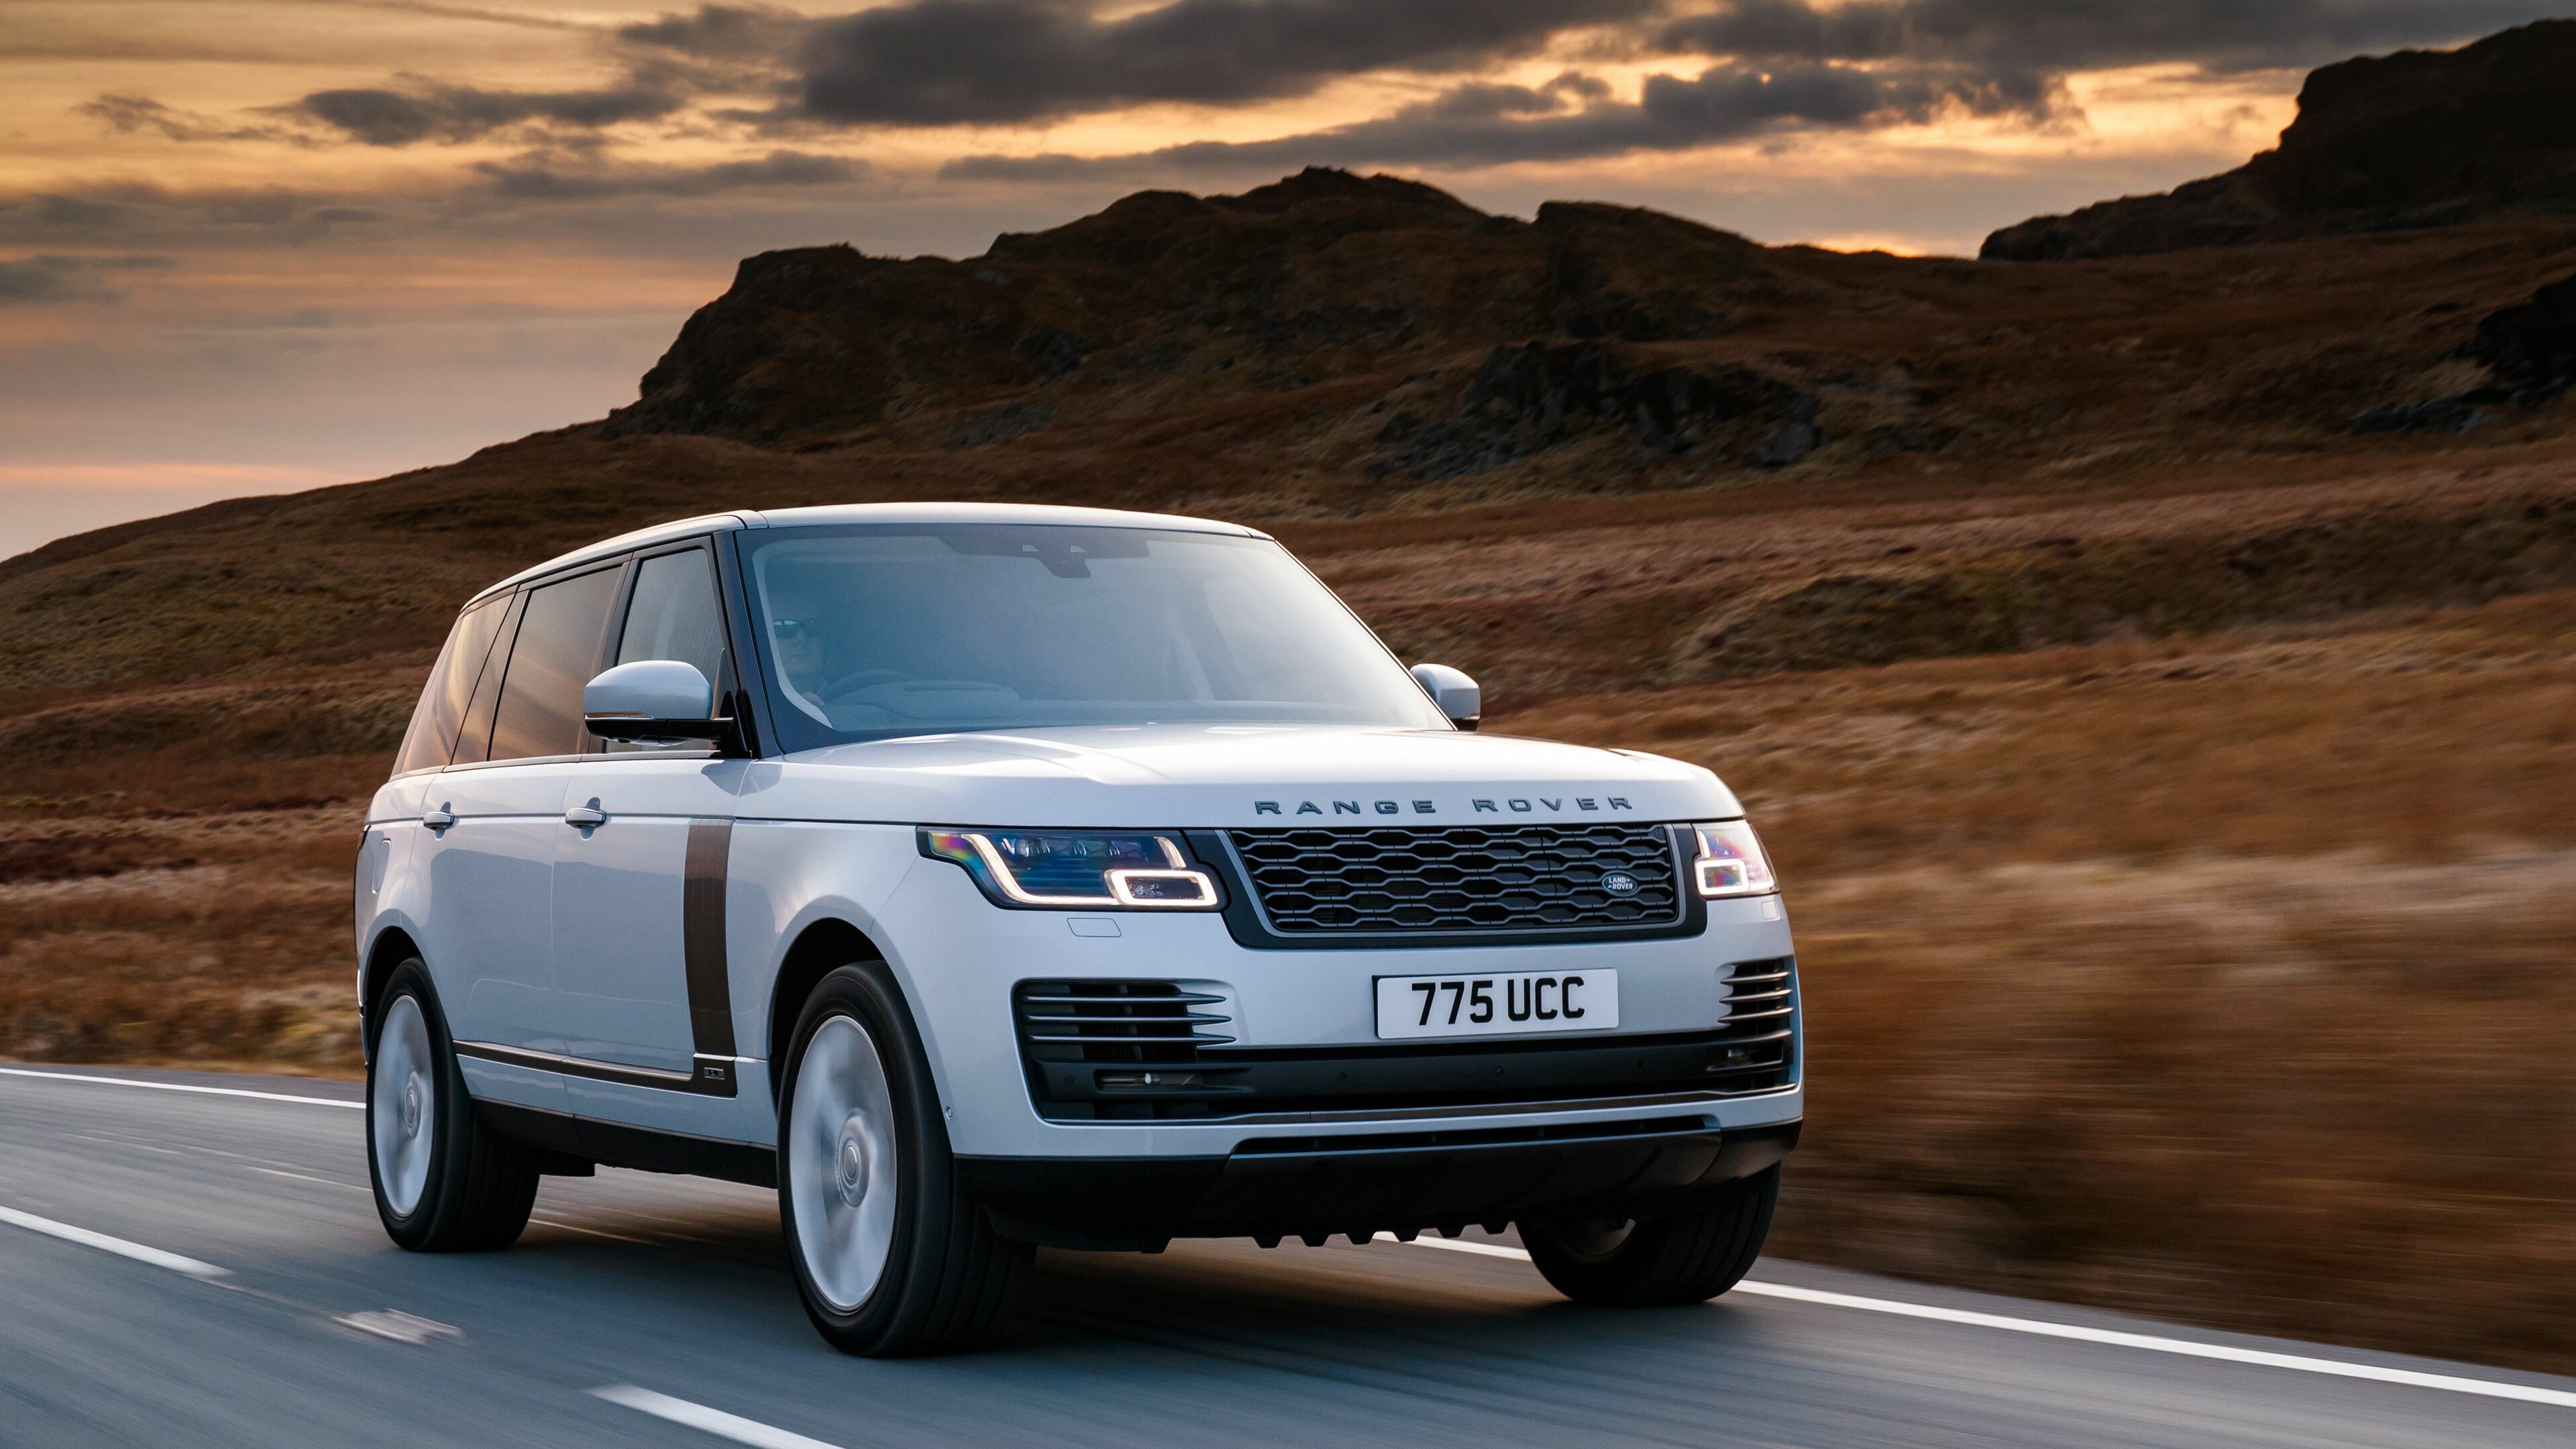 Range Rover: The first prototype was built in 1967 with plate number SYE 157F. 3840x2160 4K Wallpaper.